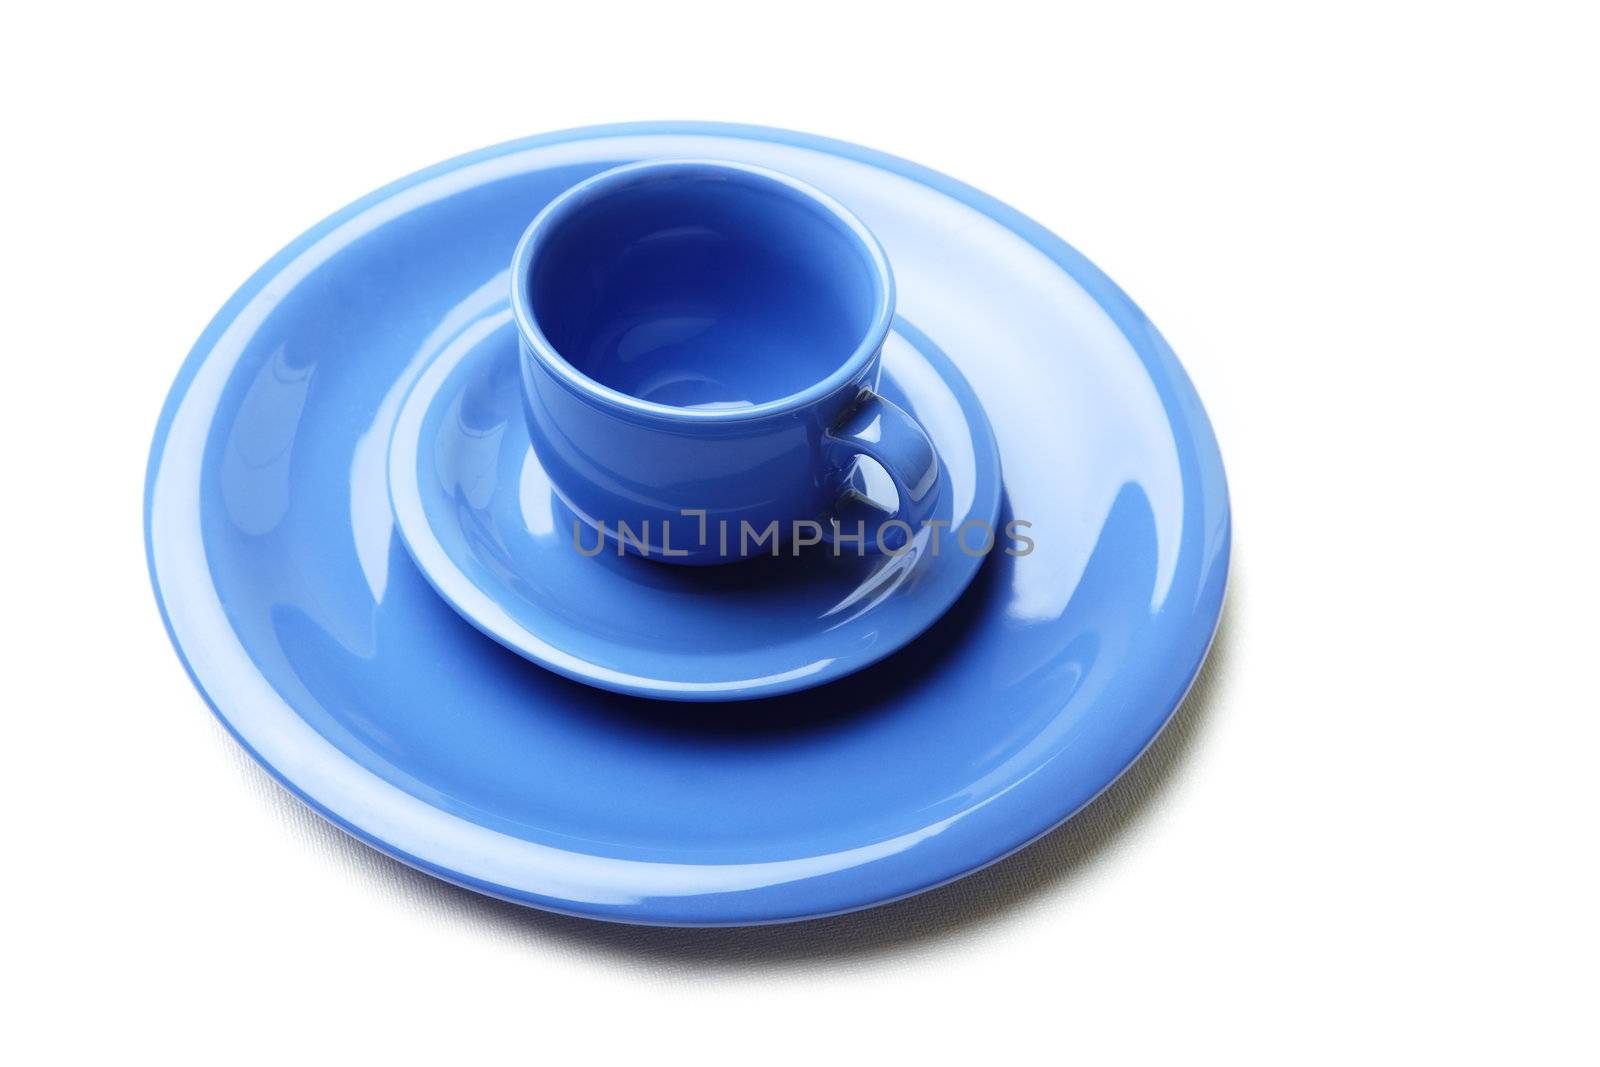 Blue plates and teacup by Novic